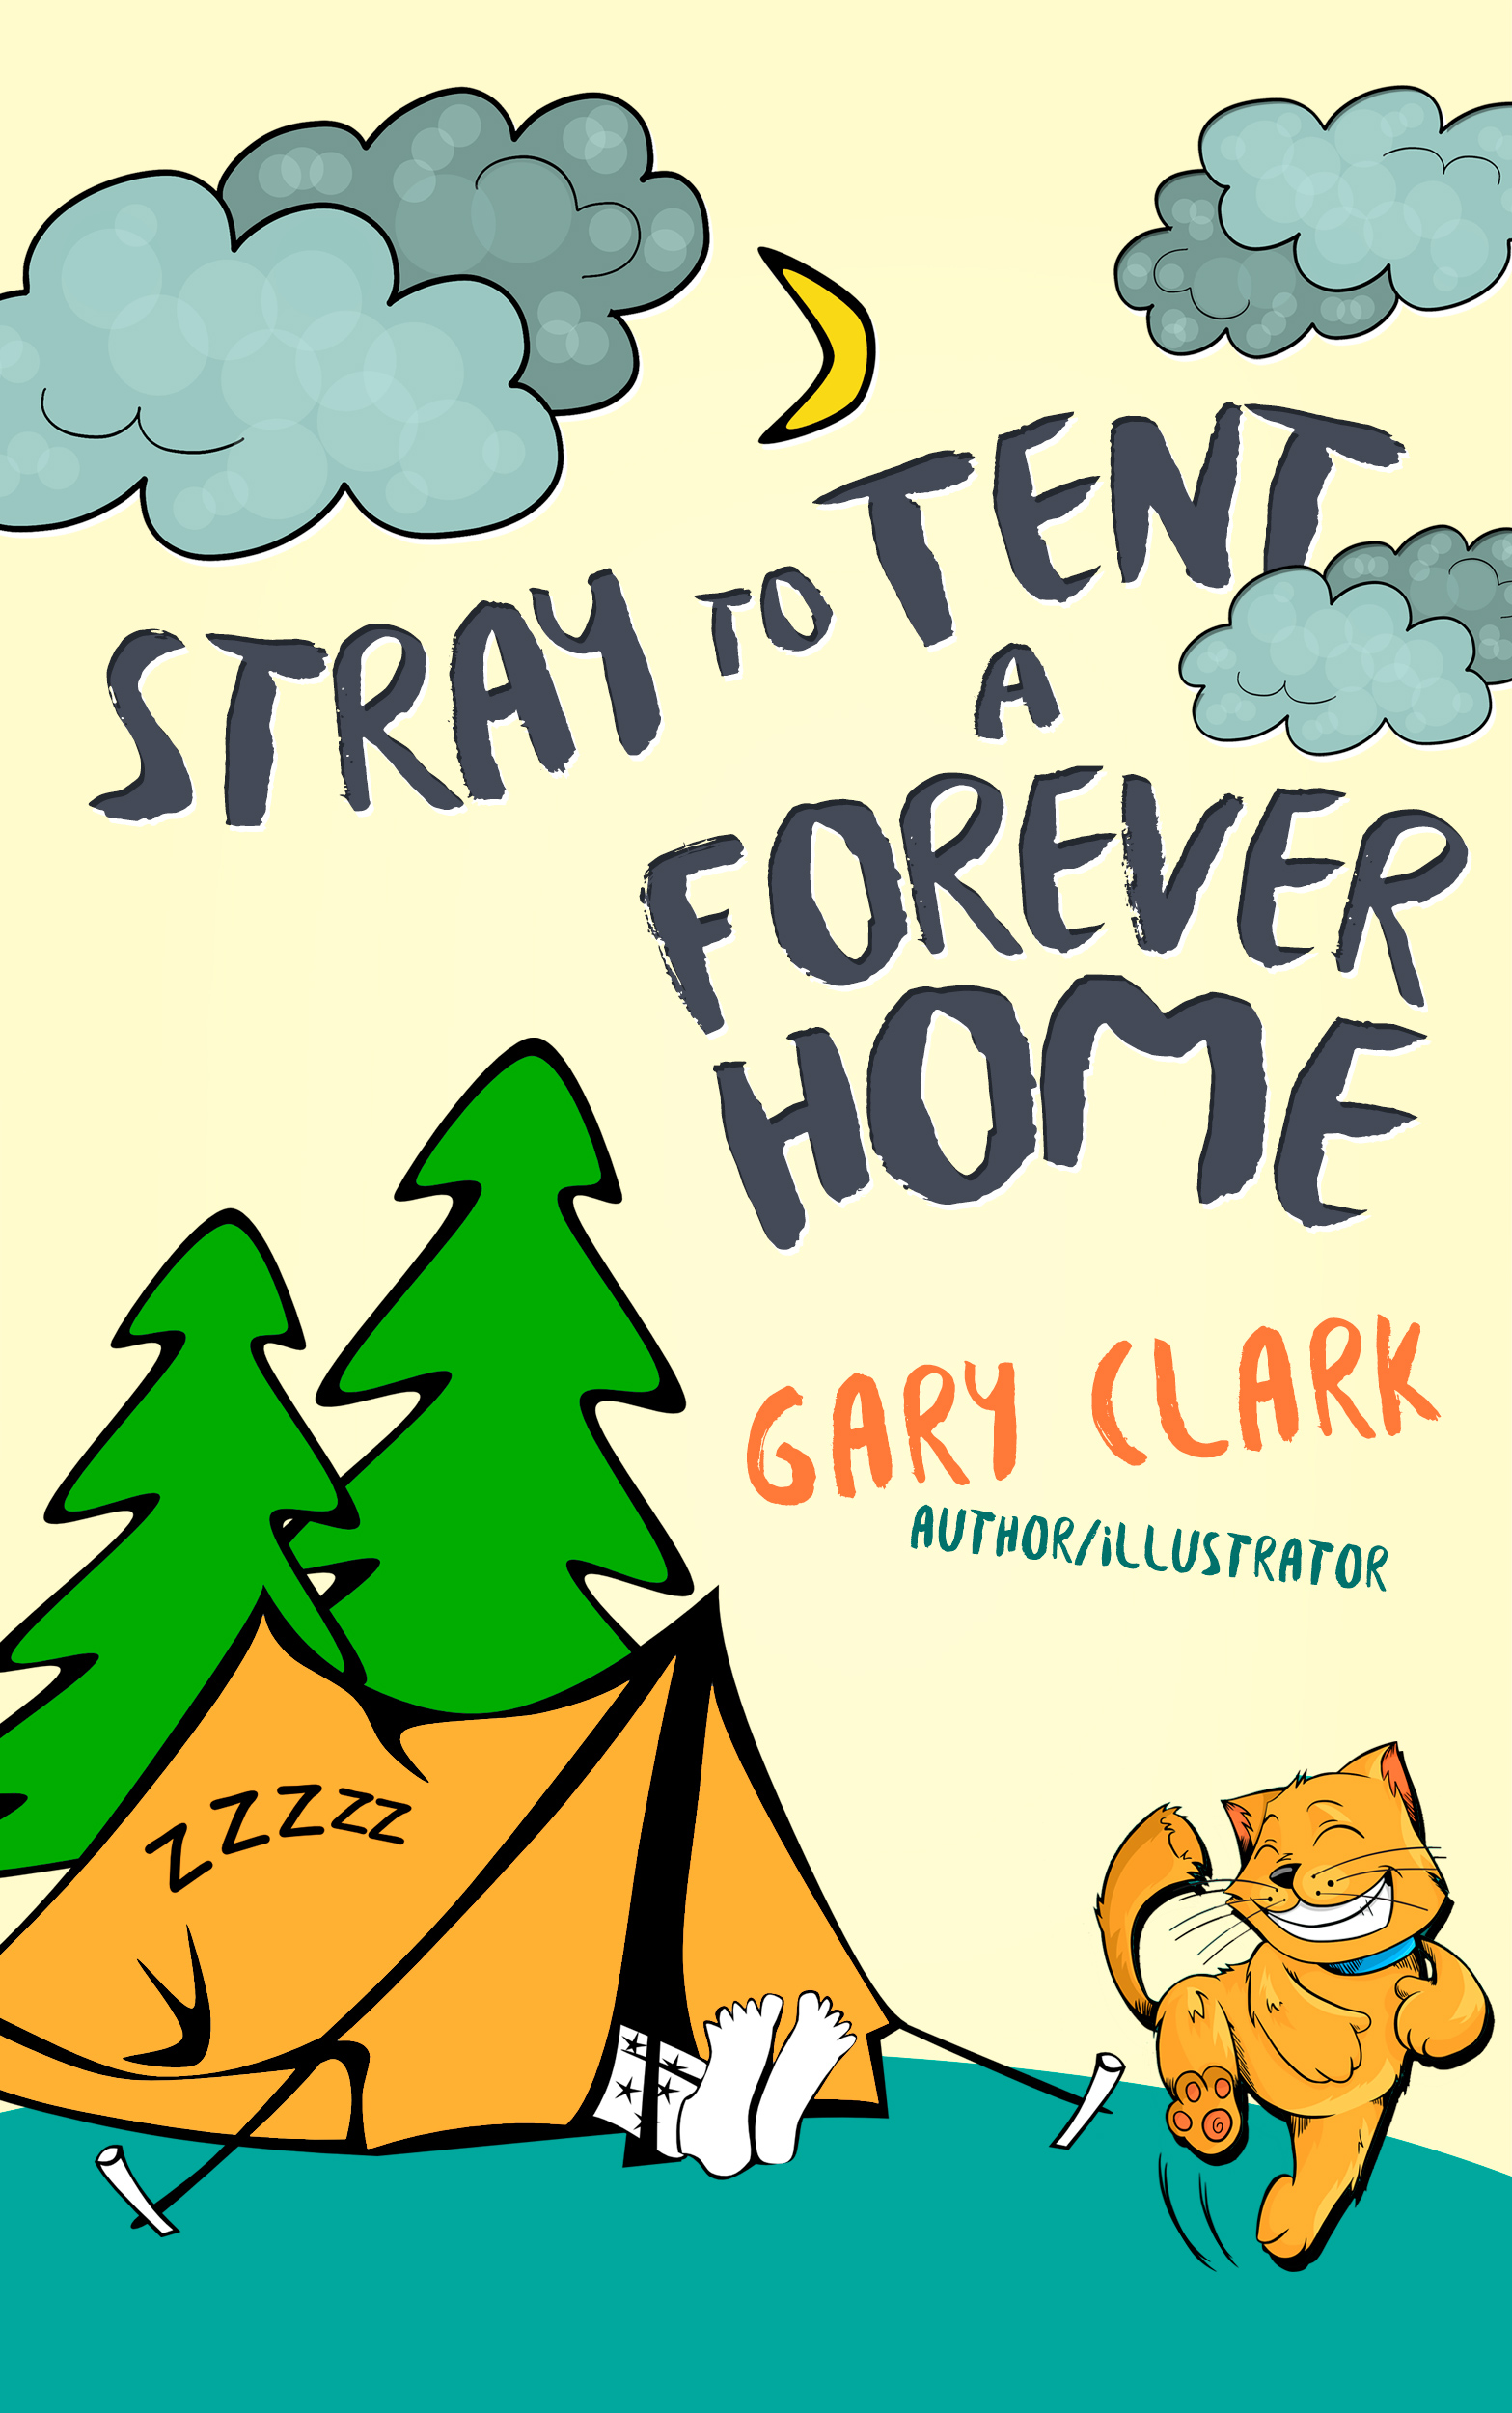 Stray to Tent A Forever Home: A Book Review